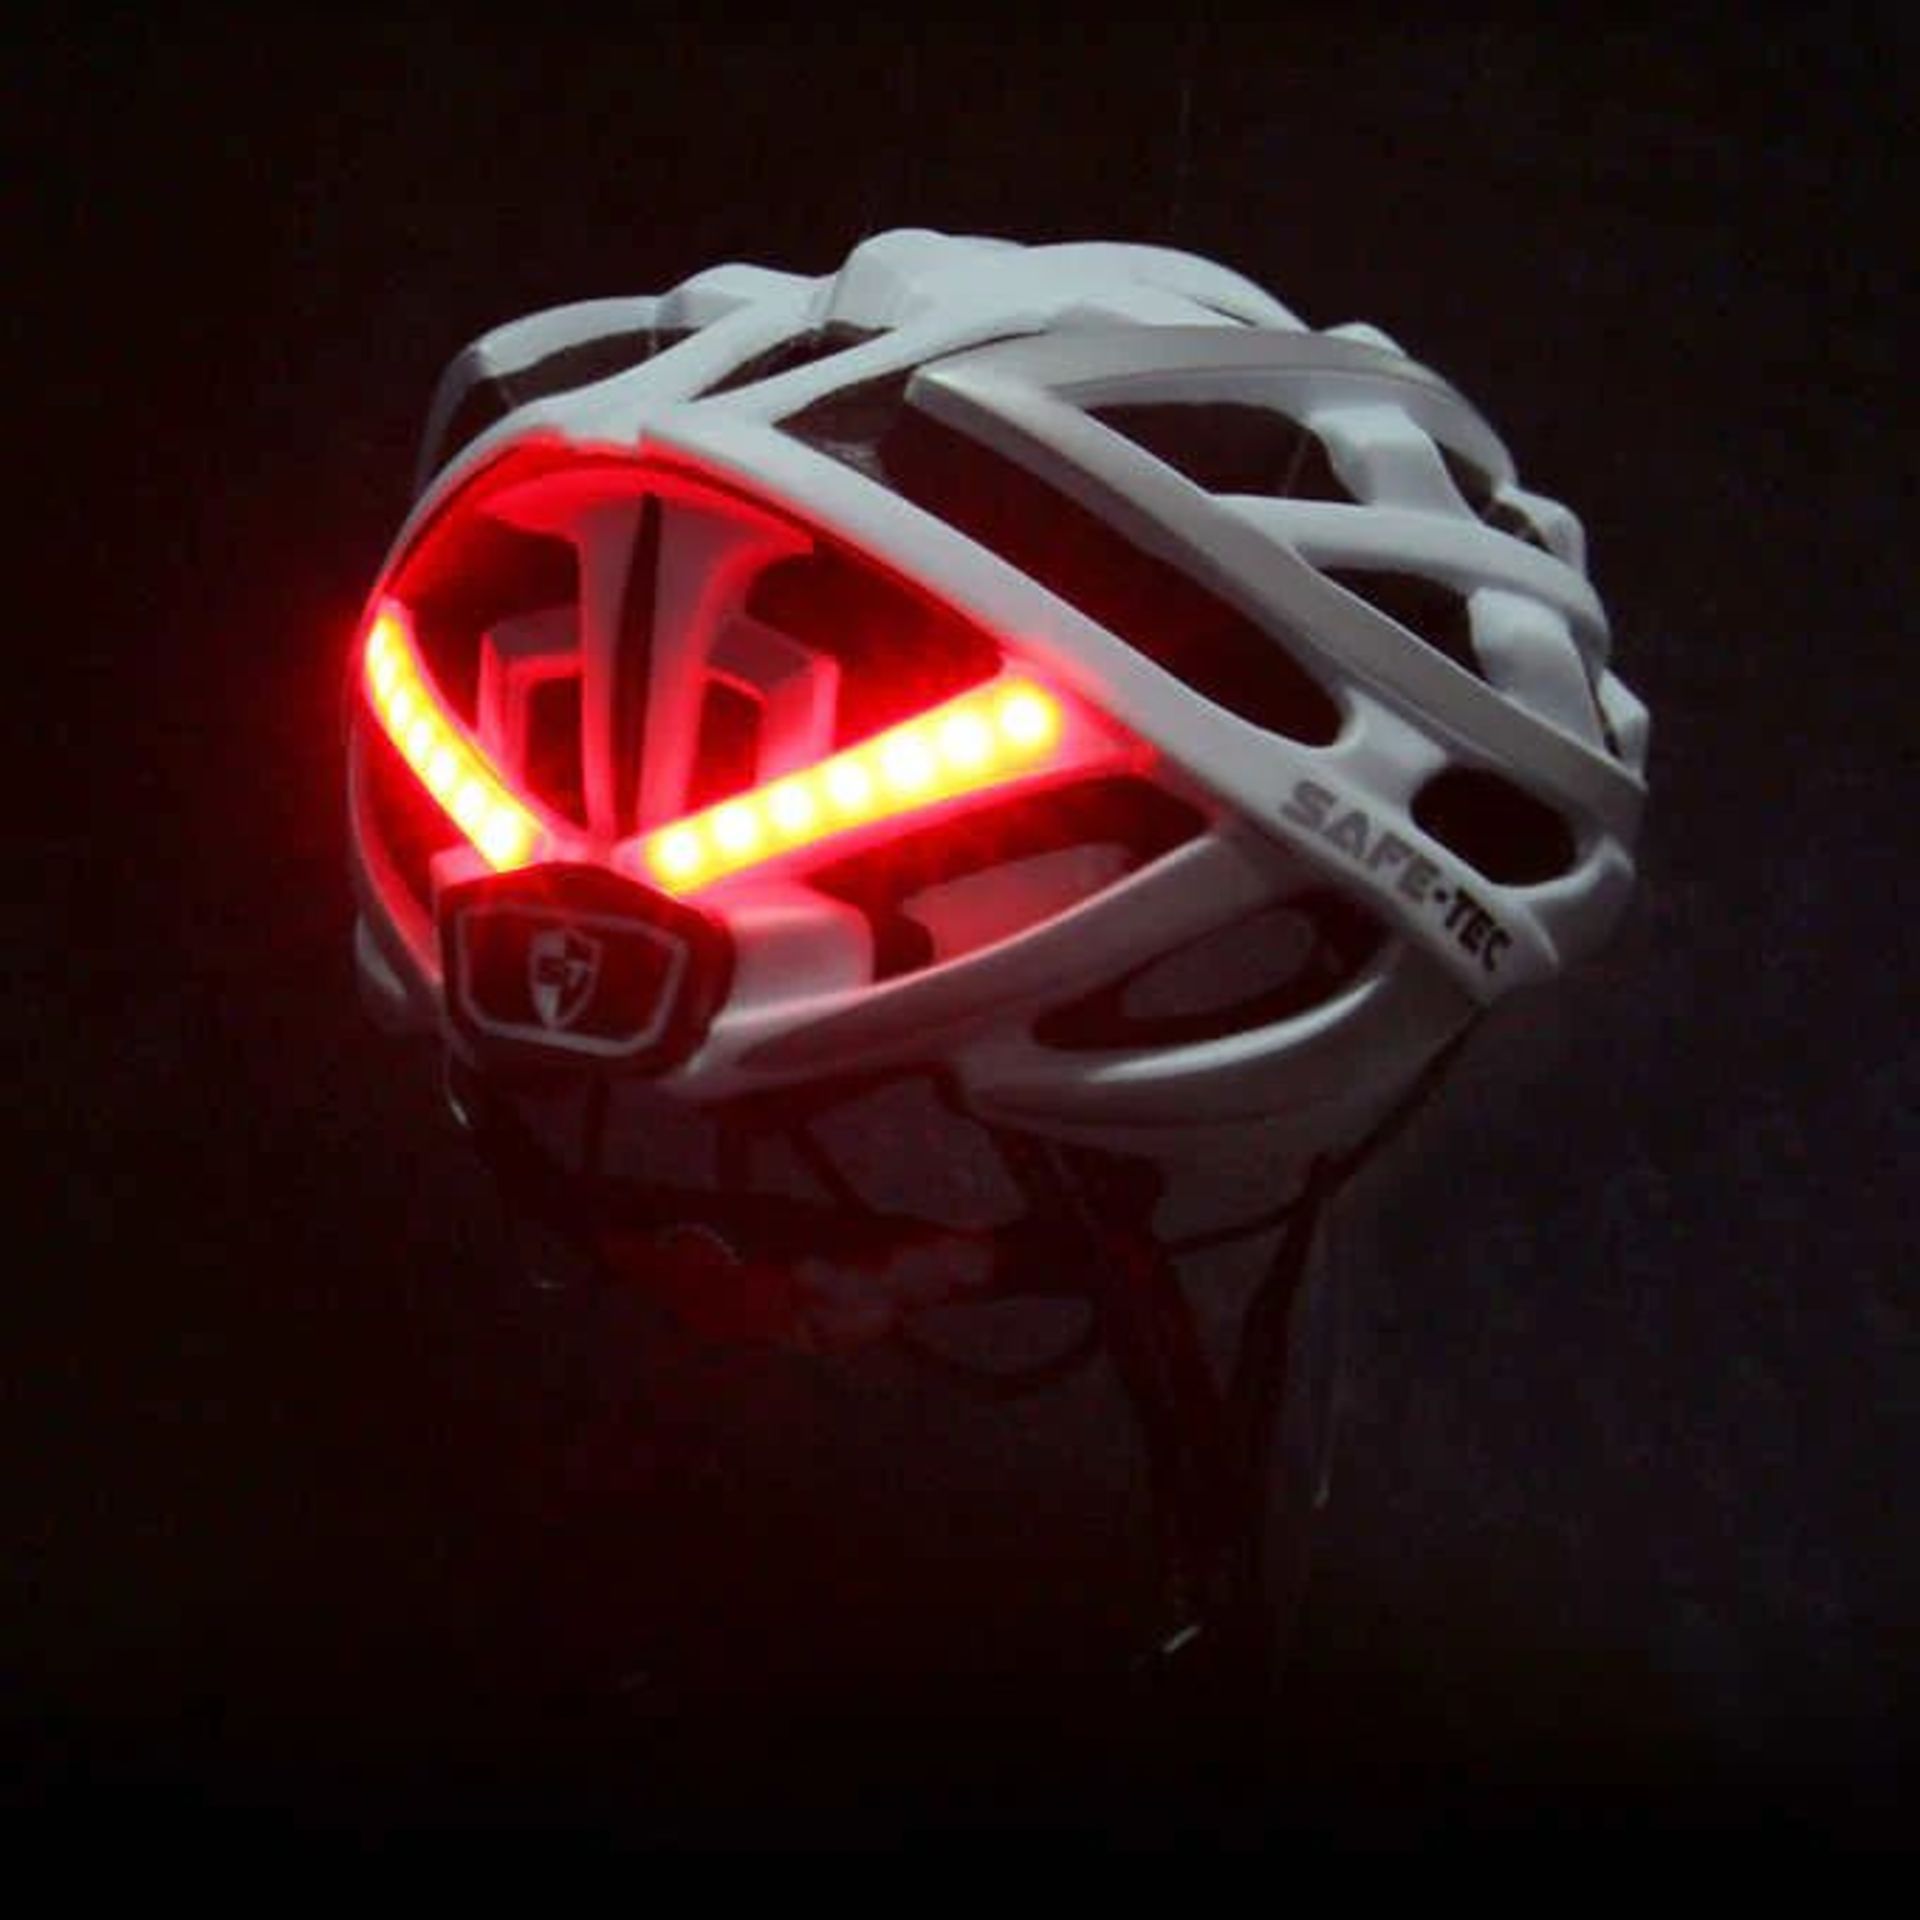 SAFE-TEC WHITE/SILVER BICYCLE HELMET (LARGE) C/W BLUETOOTH SPEAKERS & LIGHTS (NEW) (MSRP $150) - Image 8 of 8